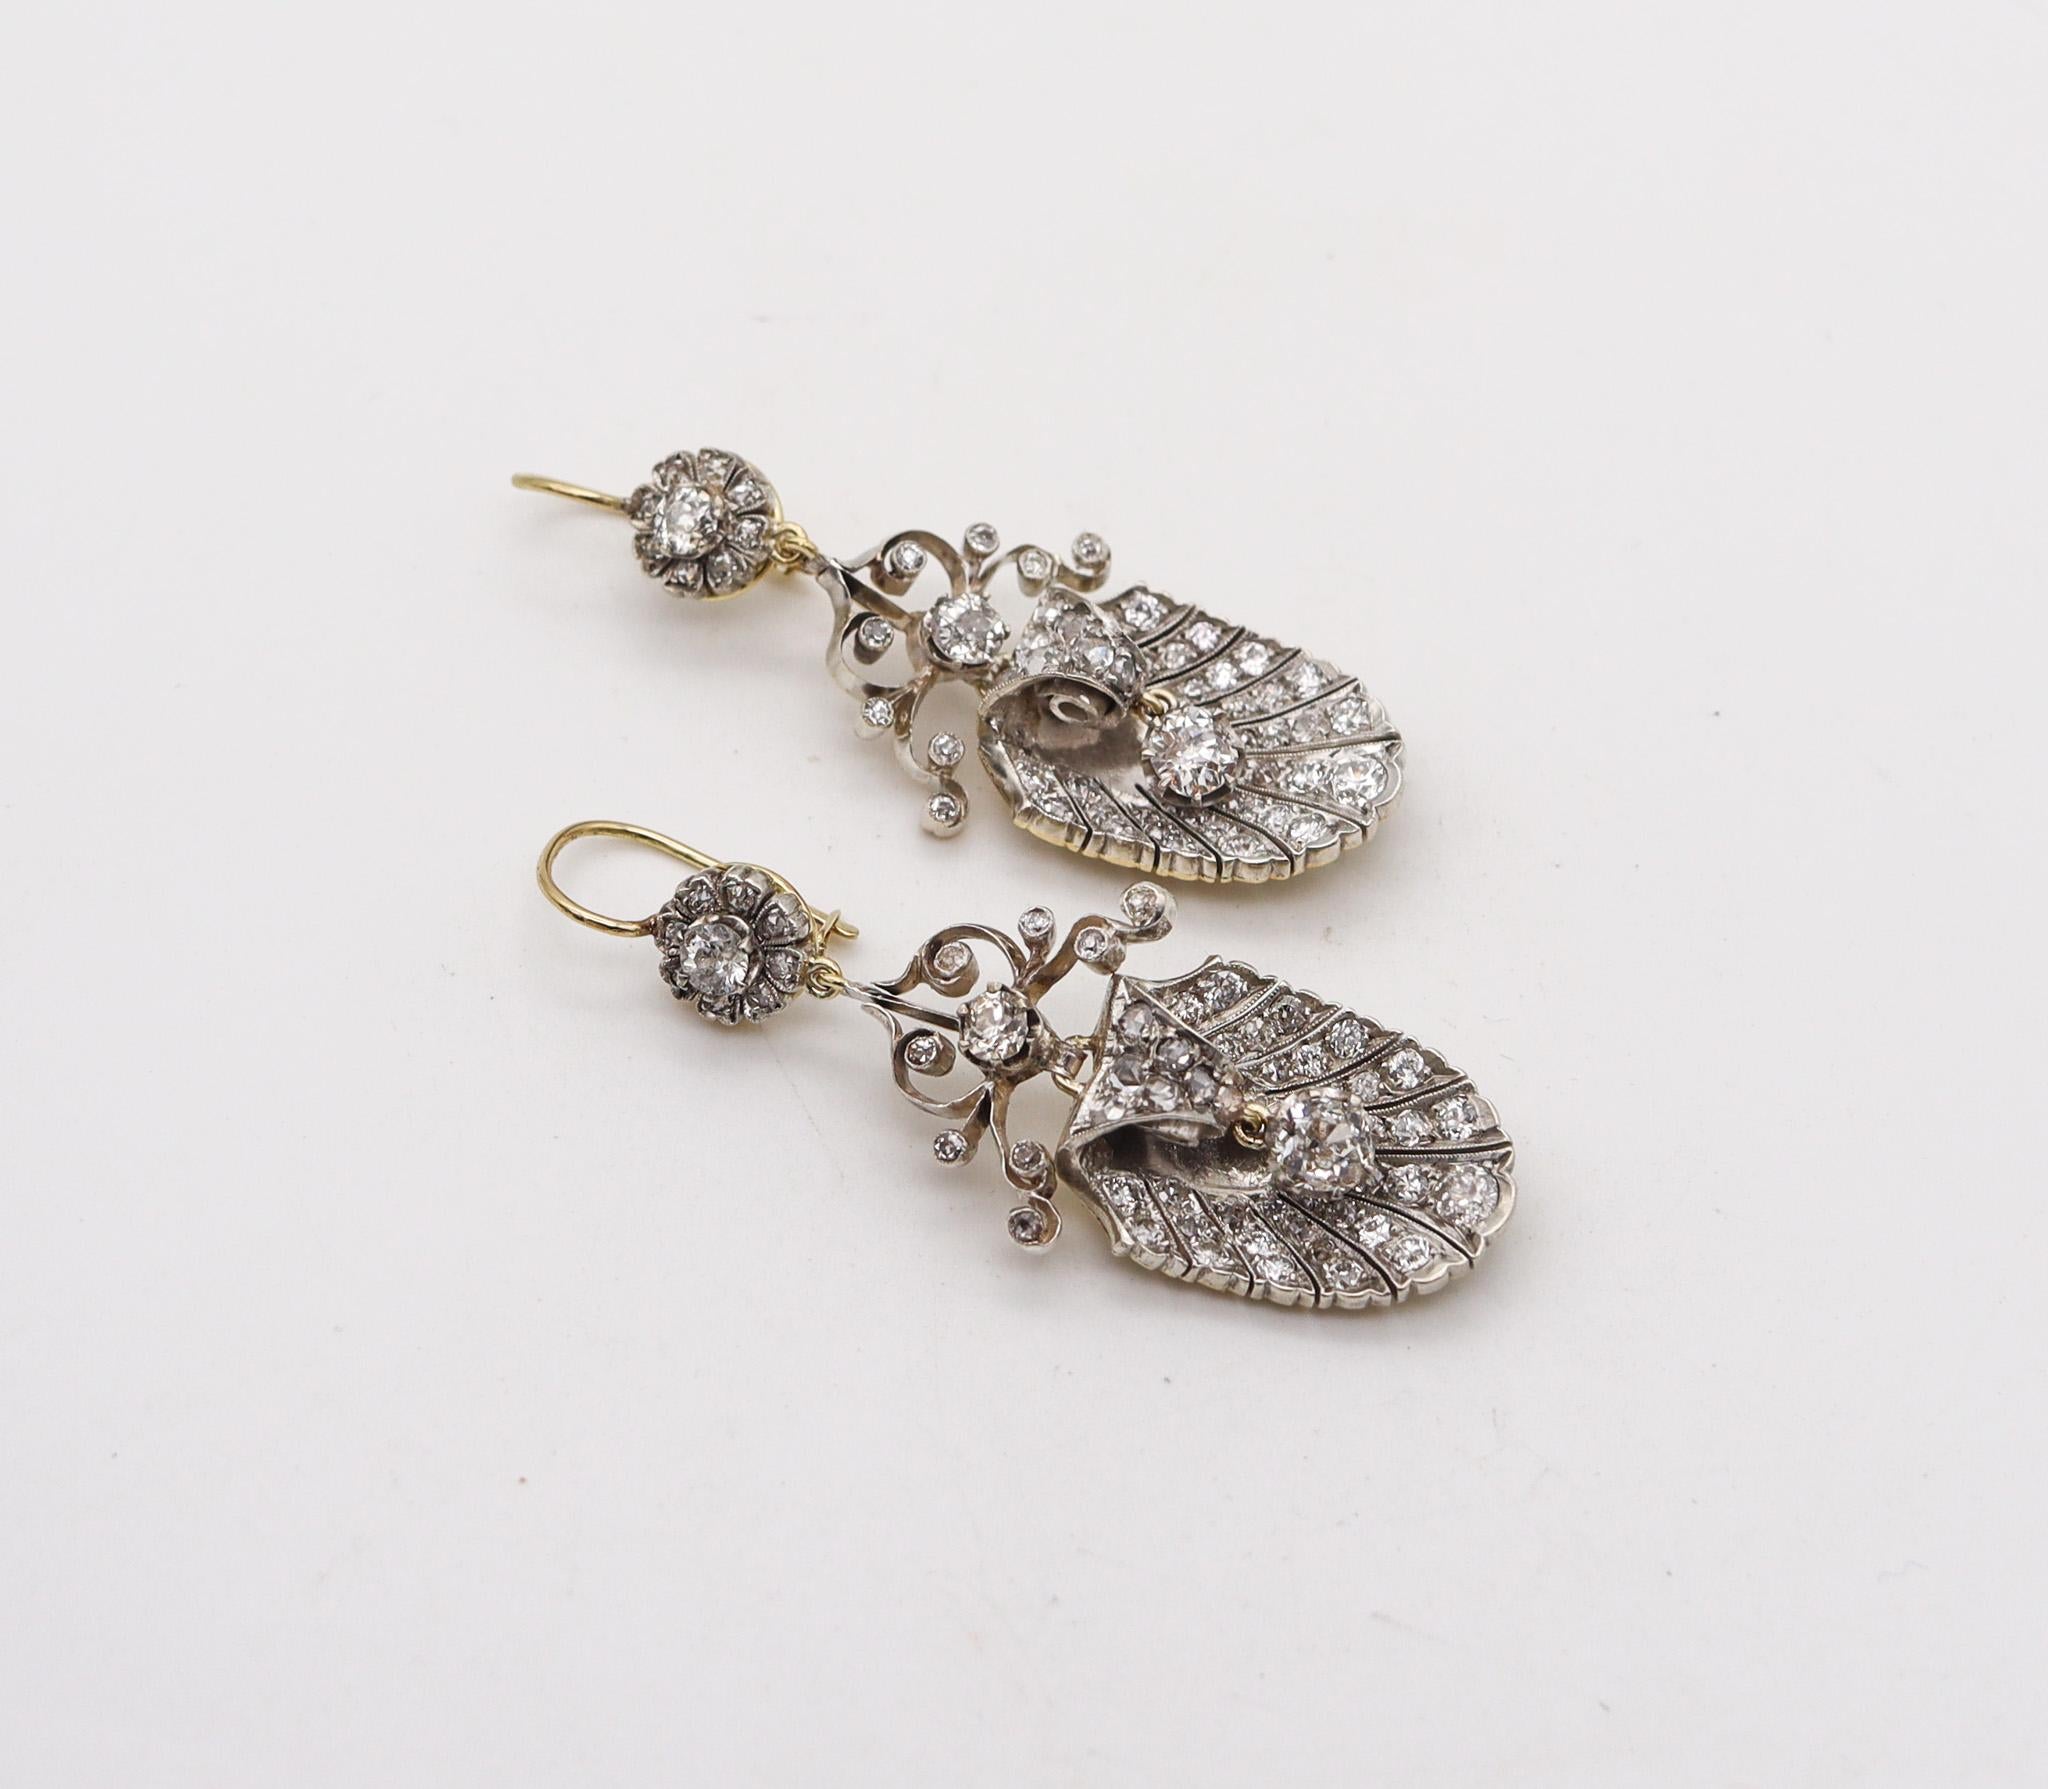 Georgian antique dangle drop earrings.

Fabulous antique pair of dangle-drops earrings, created in England during the Georgian period, circa 1800. These diamonds earrings was carefully crafted in solid yellow gold of 15 karats topped with silver for